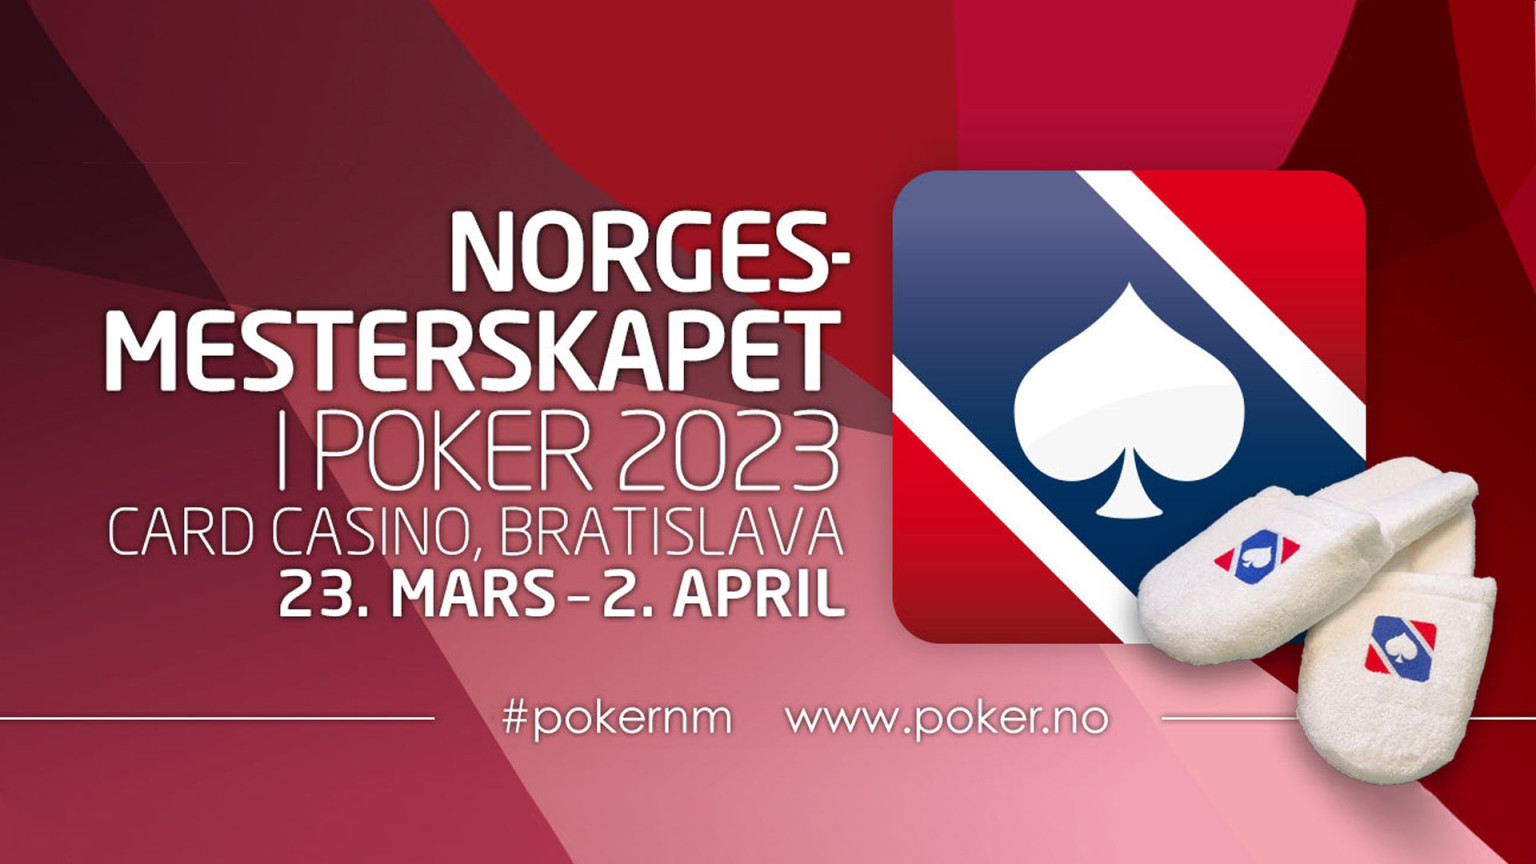 Useful information before the poker festival - NM